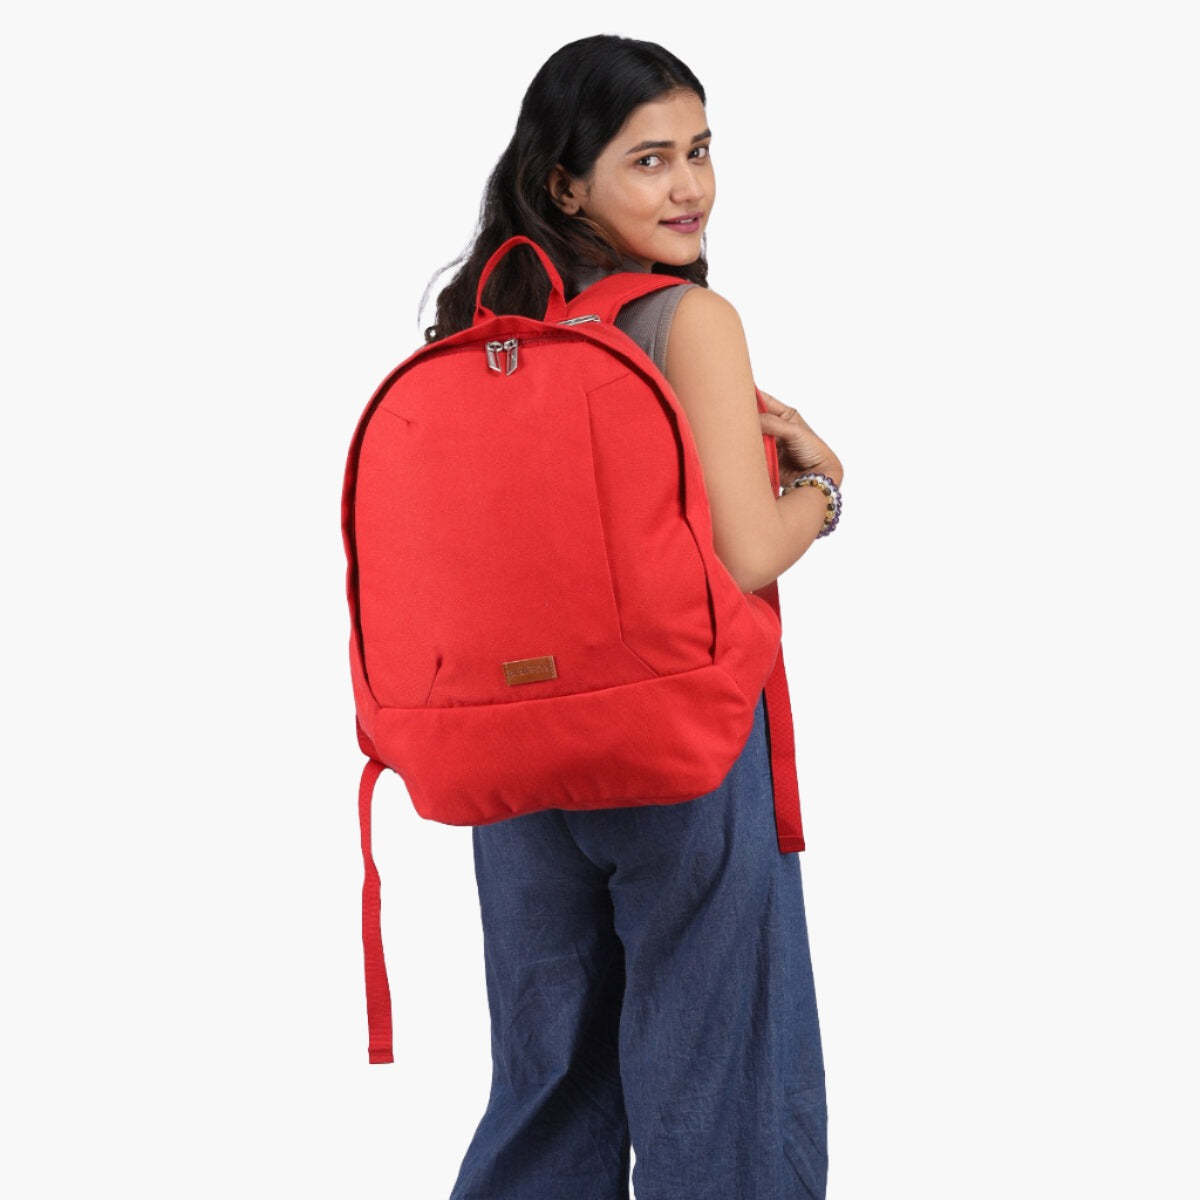 Red | Protecta Steady Progress Laptop Backpack - 3